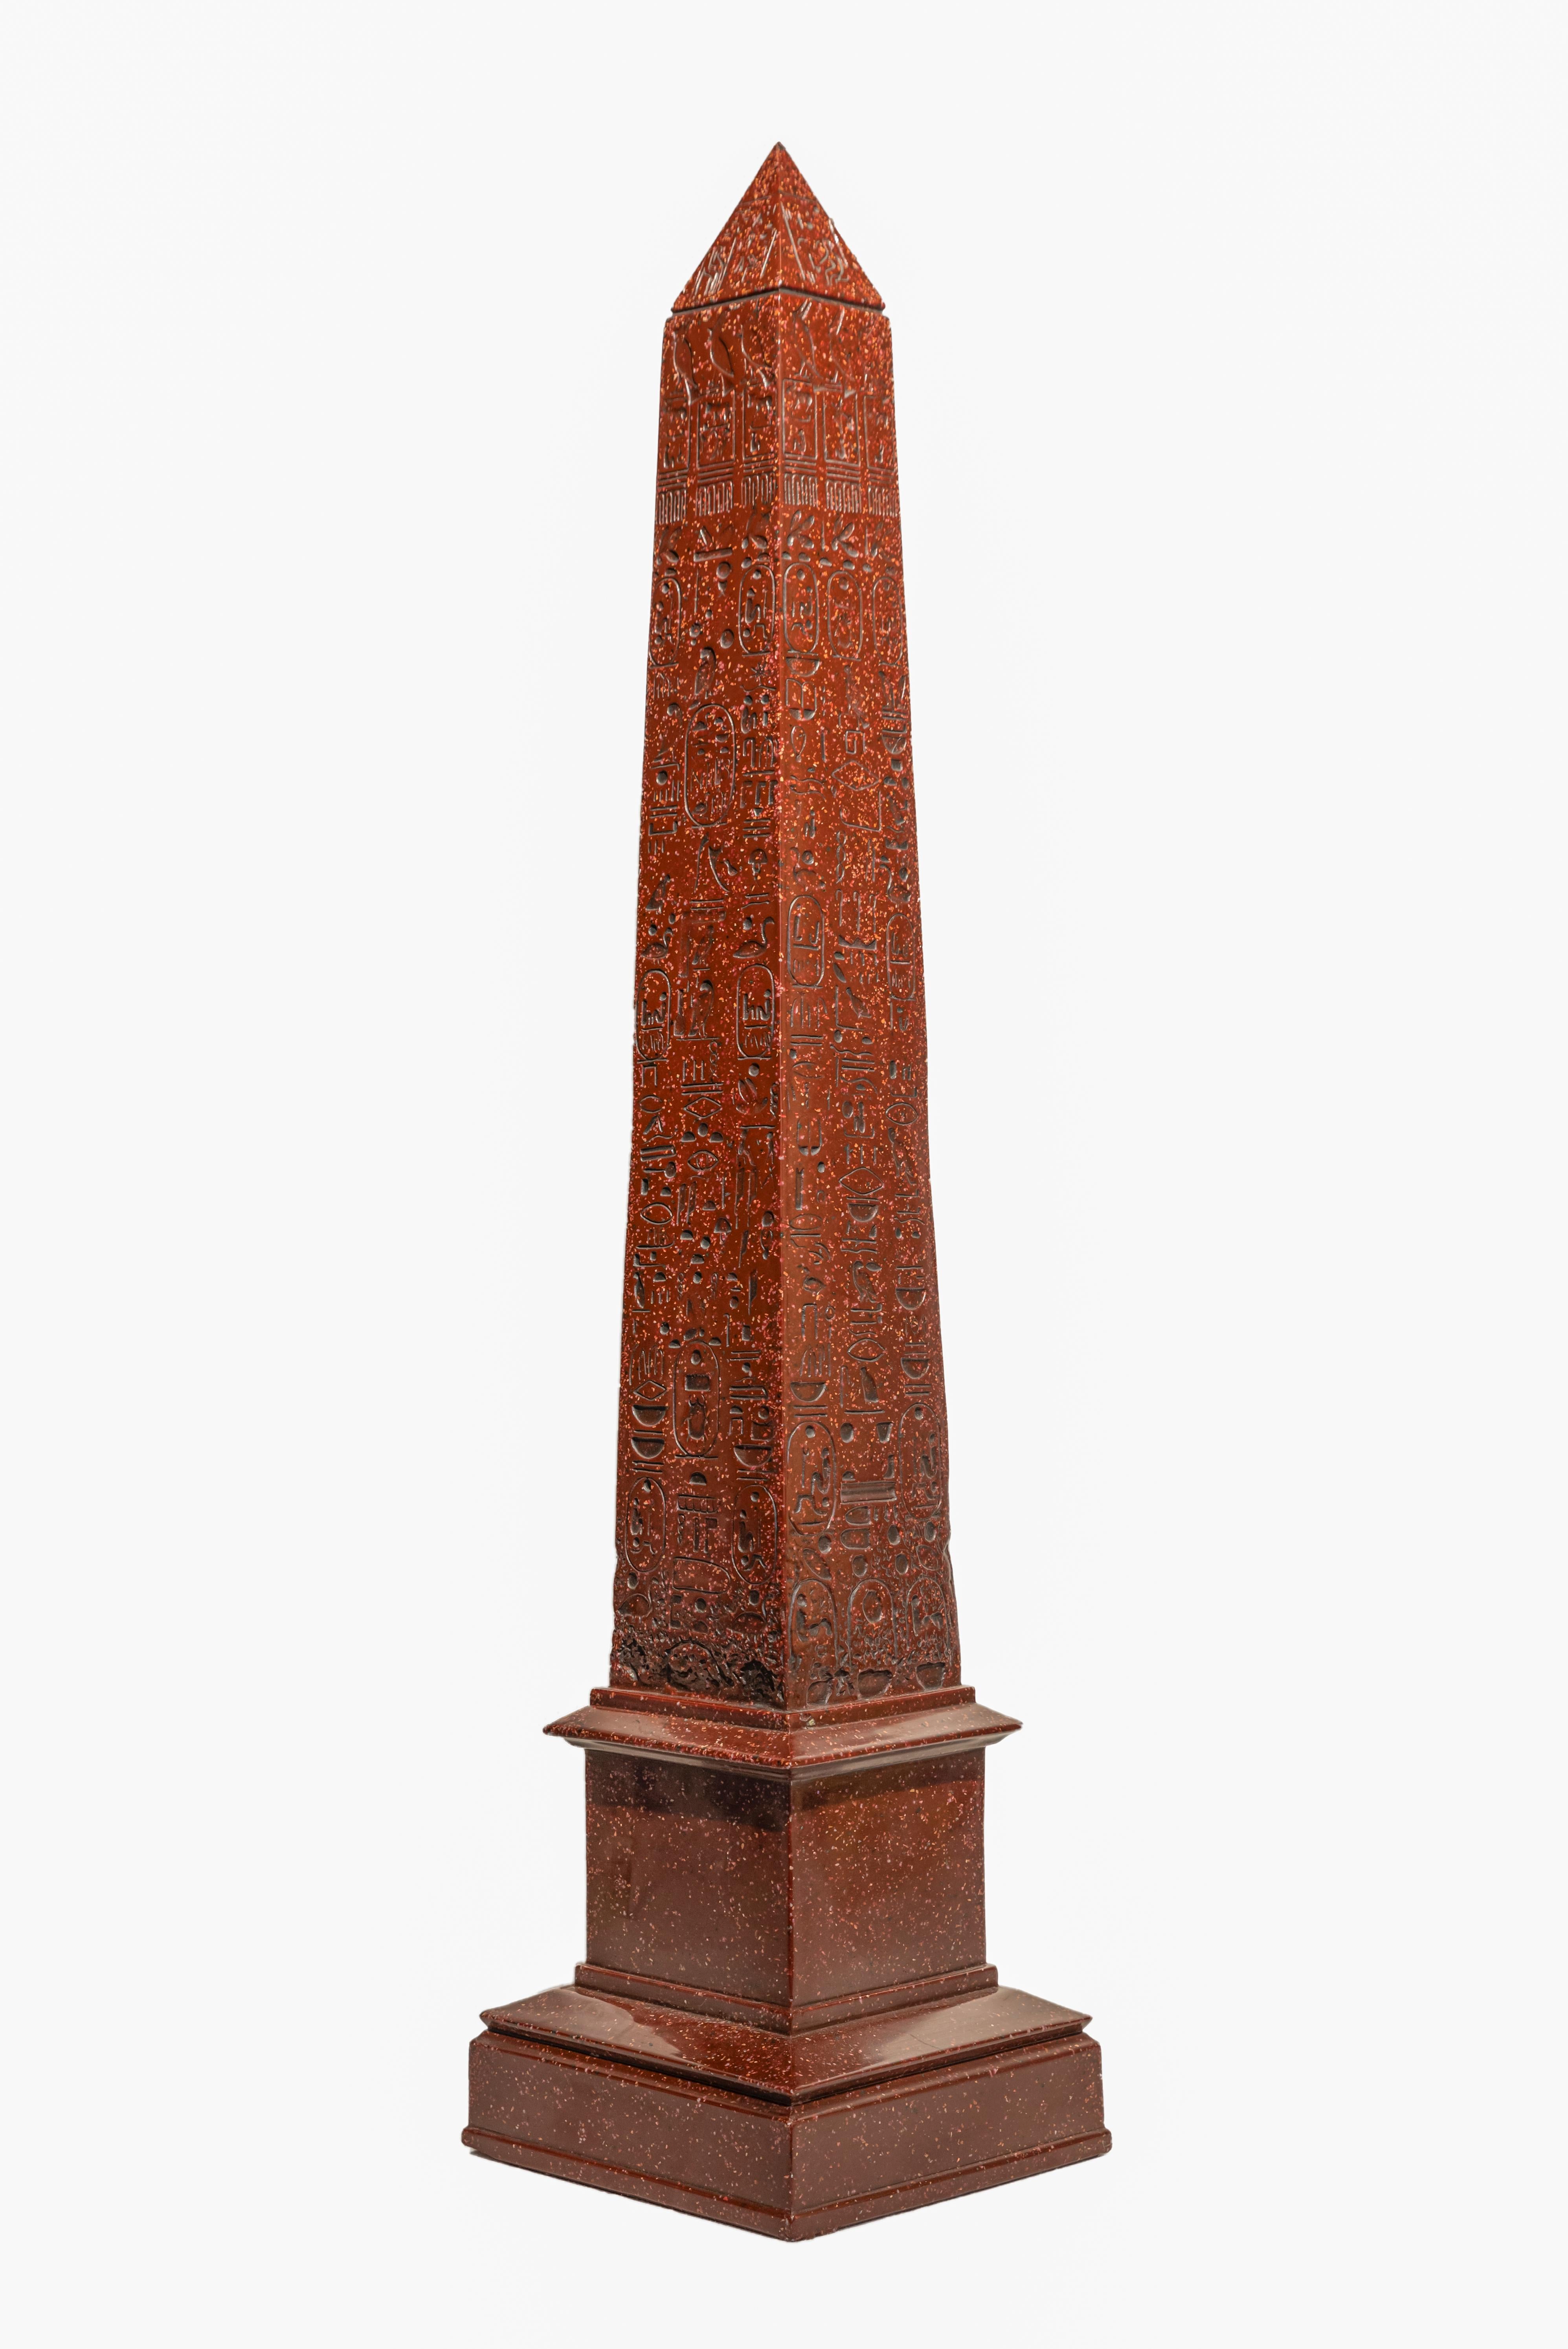 Egyptian Revival  faux marbre obelisk.
Classic model adorned by hand carved egyptian hieroglyphics.
Made in resin pate as faux red marble or porphyry.